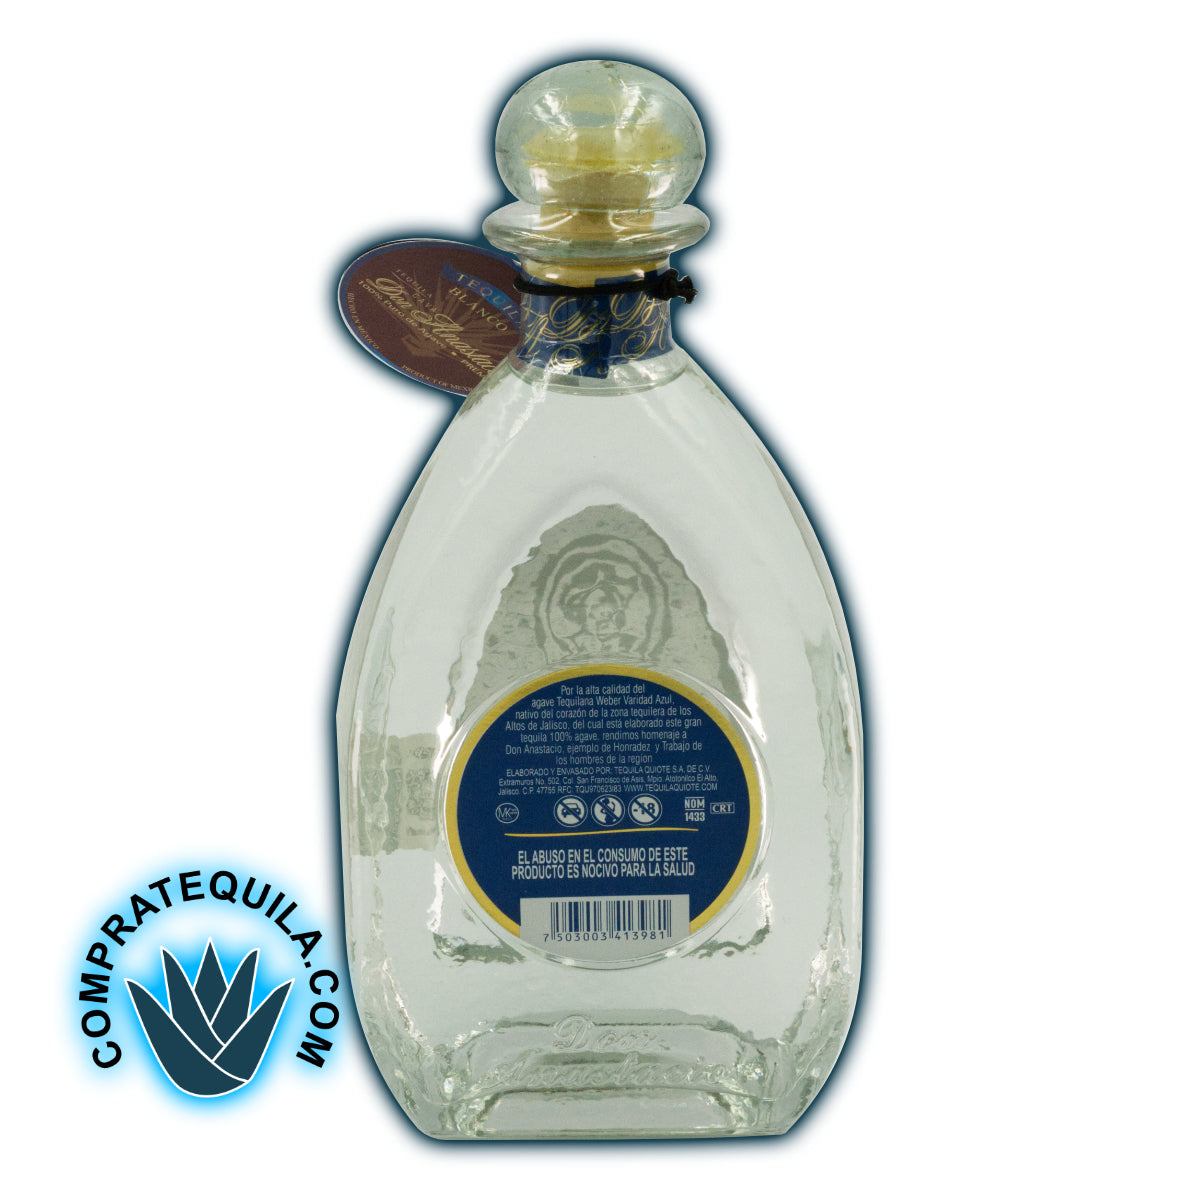 Don Anastacio Blanco Tequila: The perfection of flavor in every sip, available at Compratequila.com